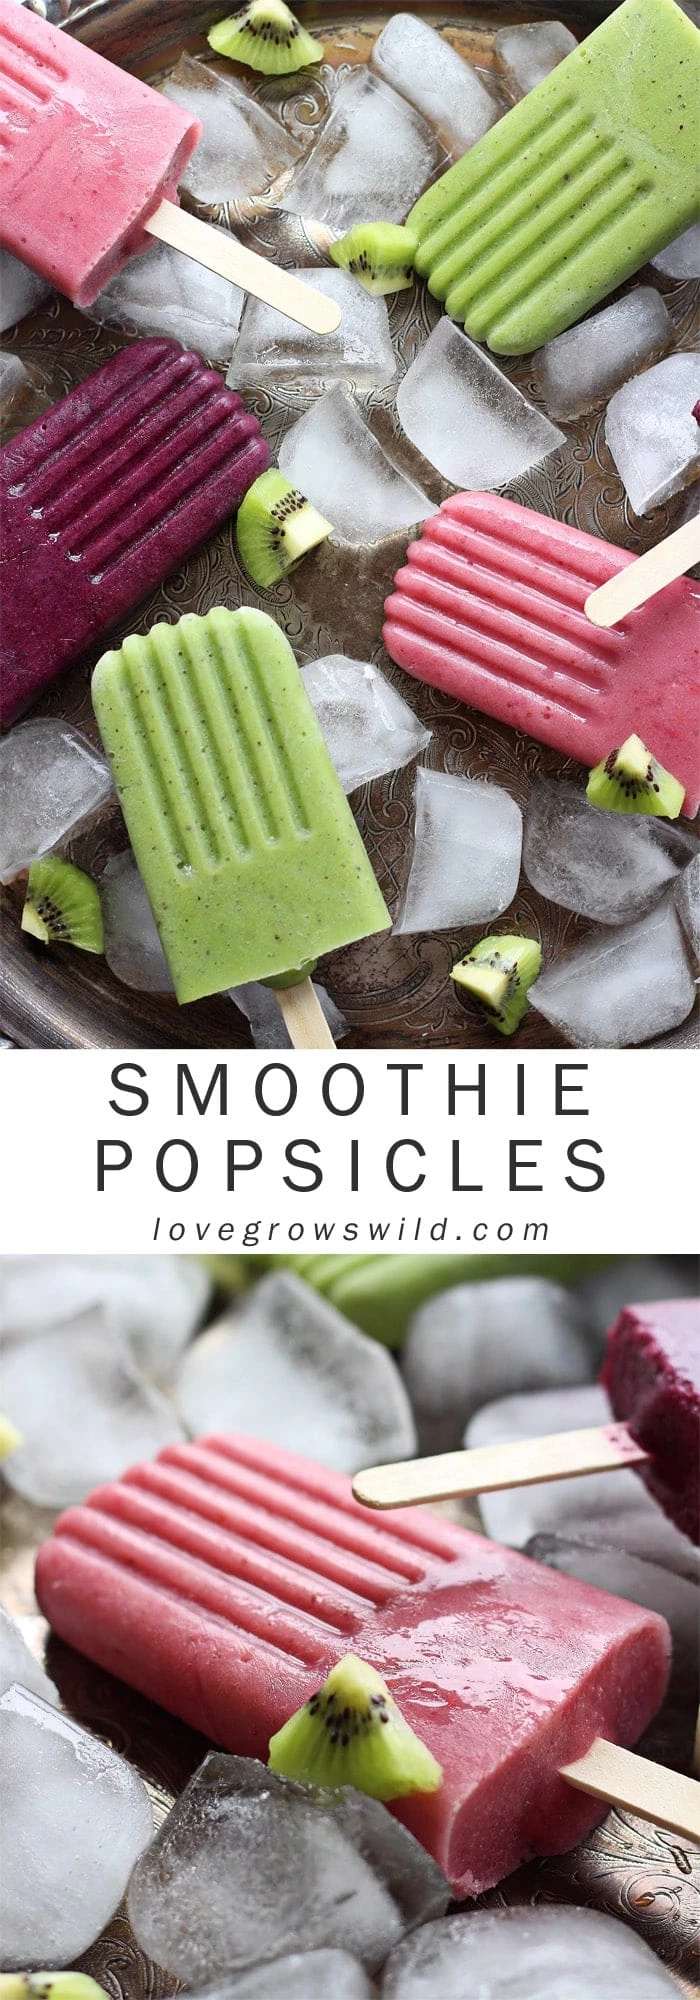 Delicious Adult Popsicles - Smoothie Popsicles